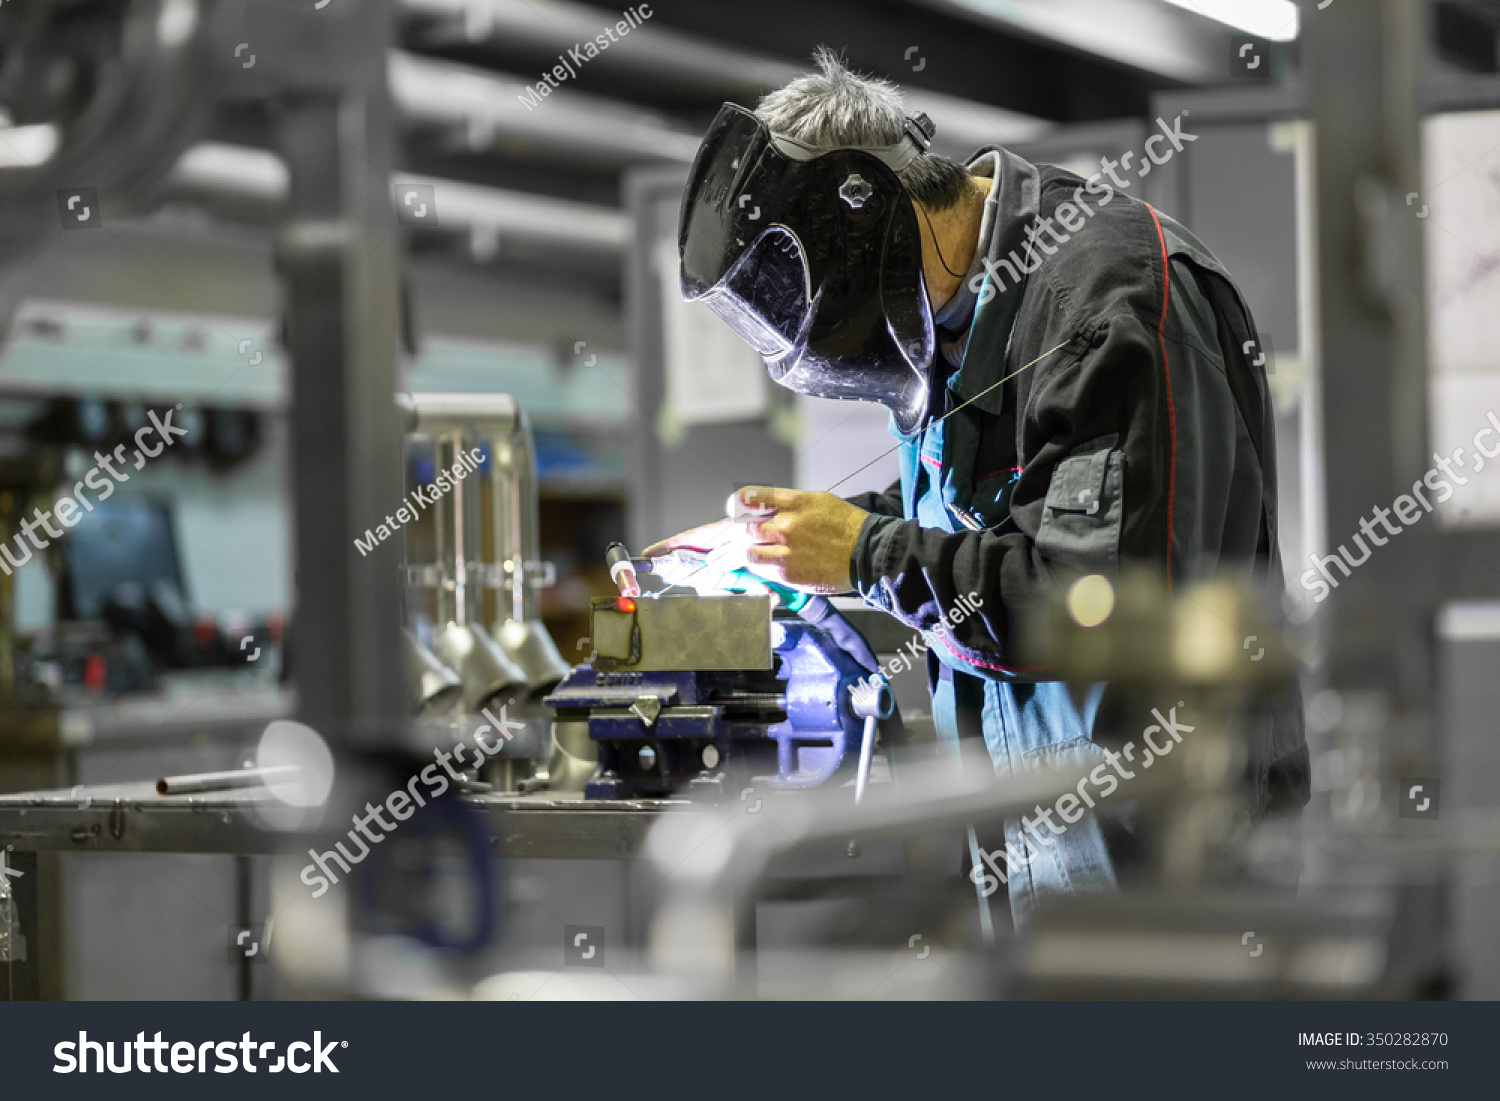 Industrial worker with protective mask welding inox elements in steel structures manufacture workshop. #350282870